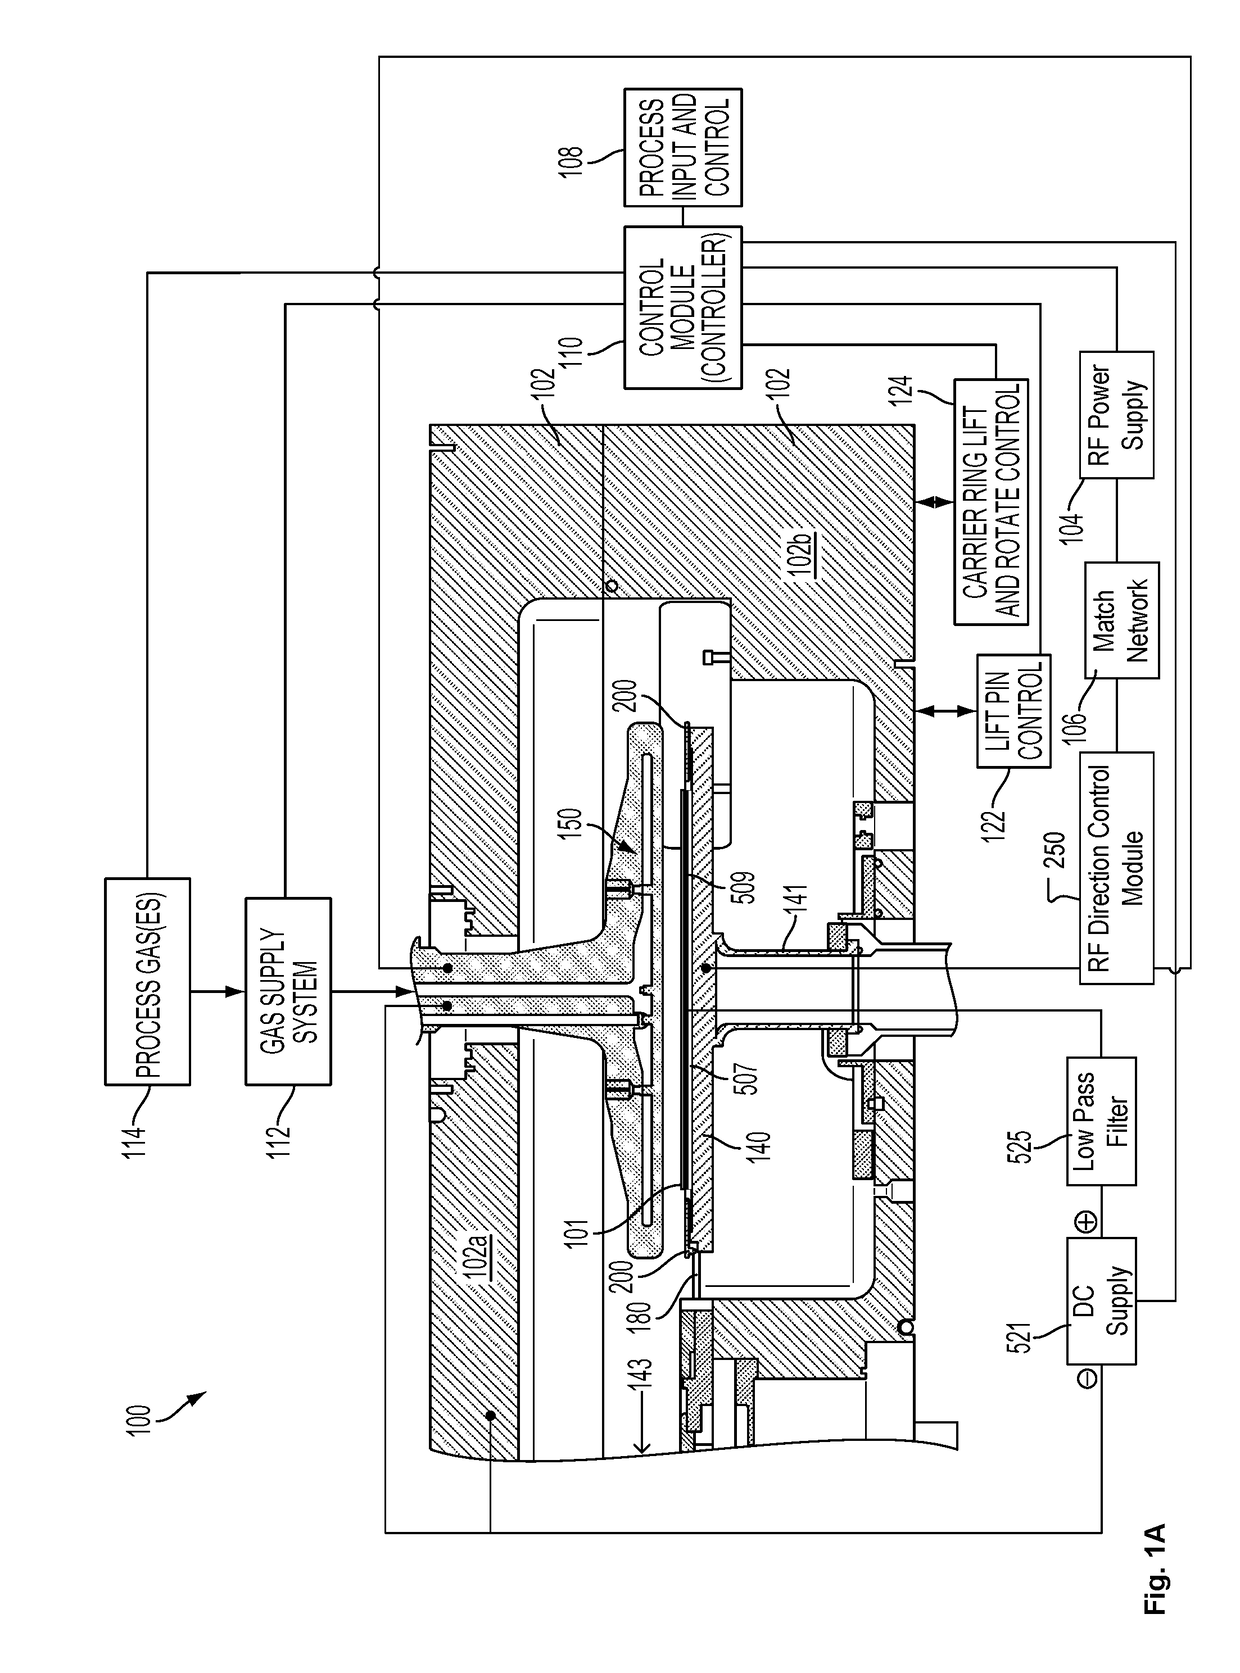 Systems and methods for UV-based suppression of plasma instability